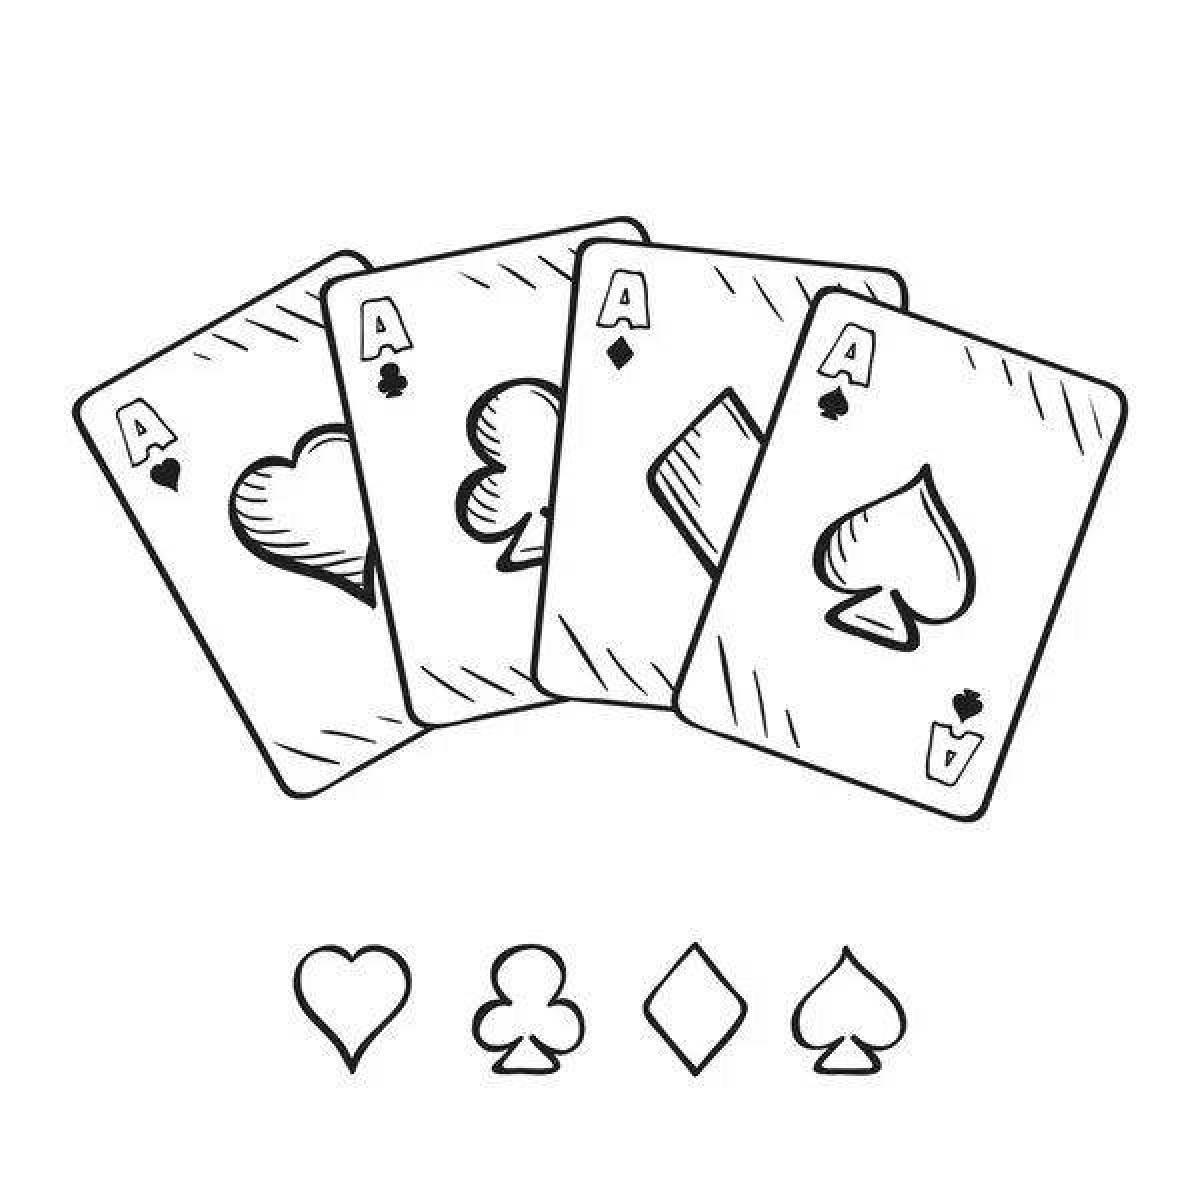 Playing cards #13